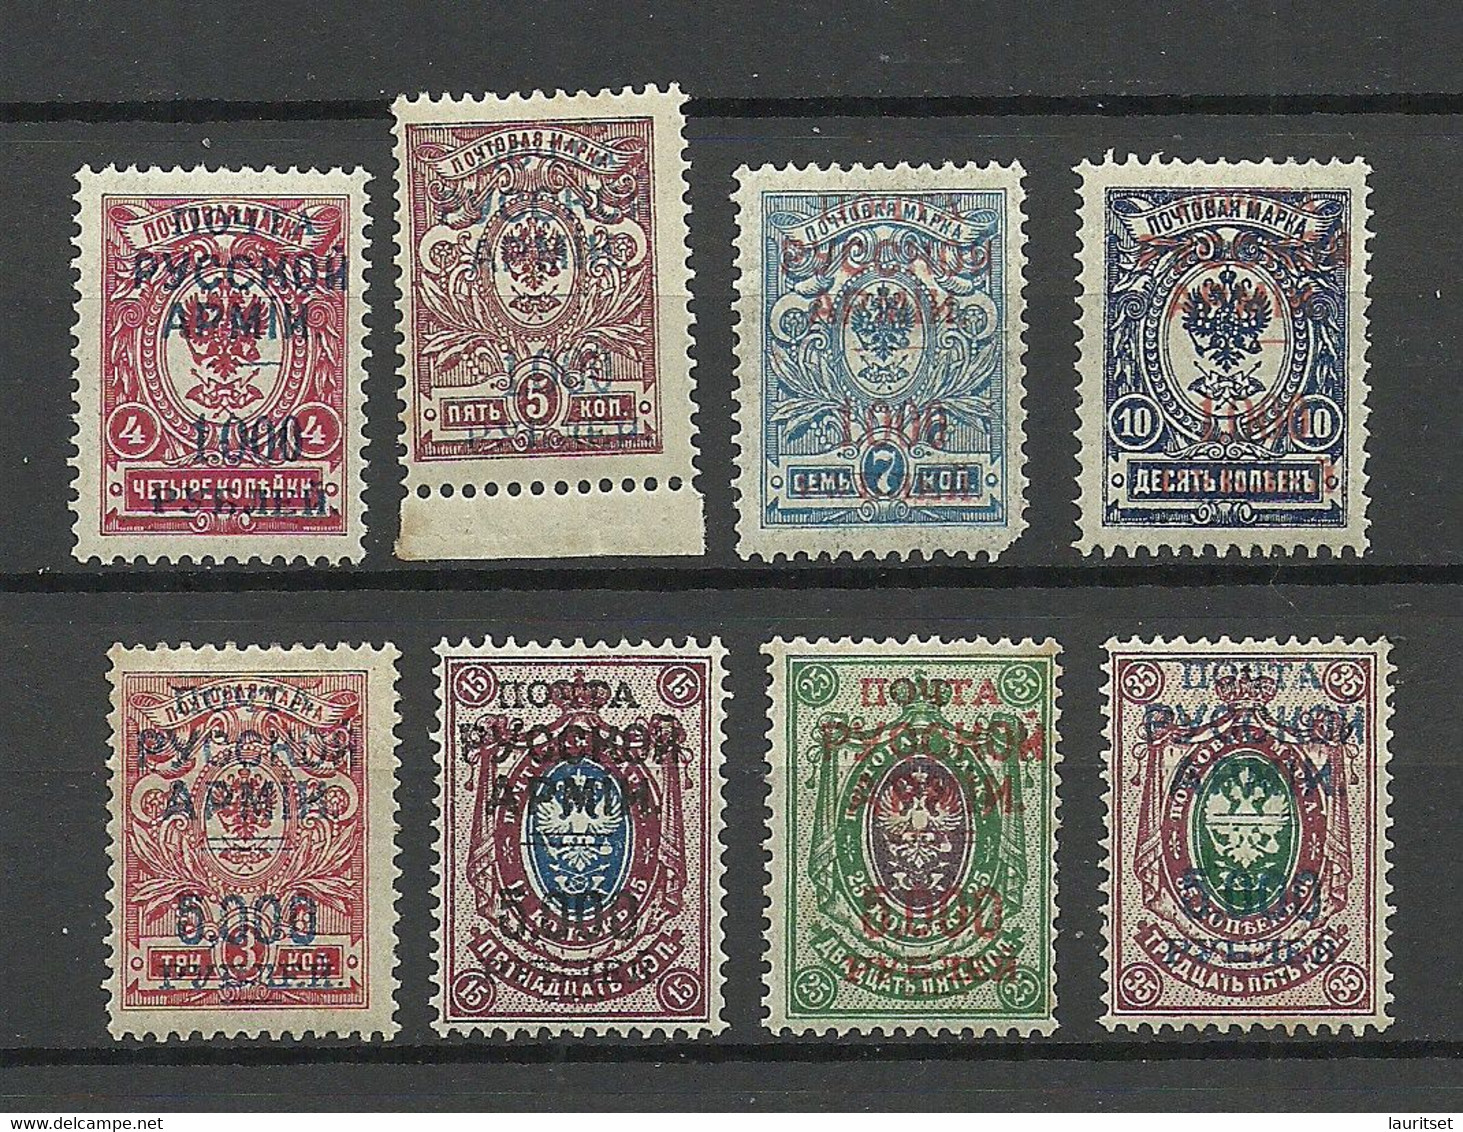 RUSSLAND RUSSIA 1920 Civil War Wrangel Army Camp Post At Gallipoli OPT, 8 Stamps * Some Are Signed - Armée Wrangel